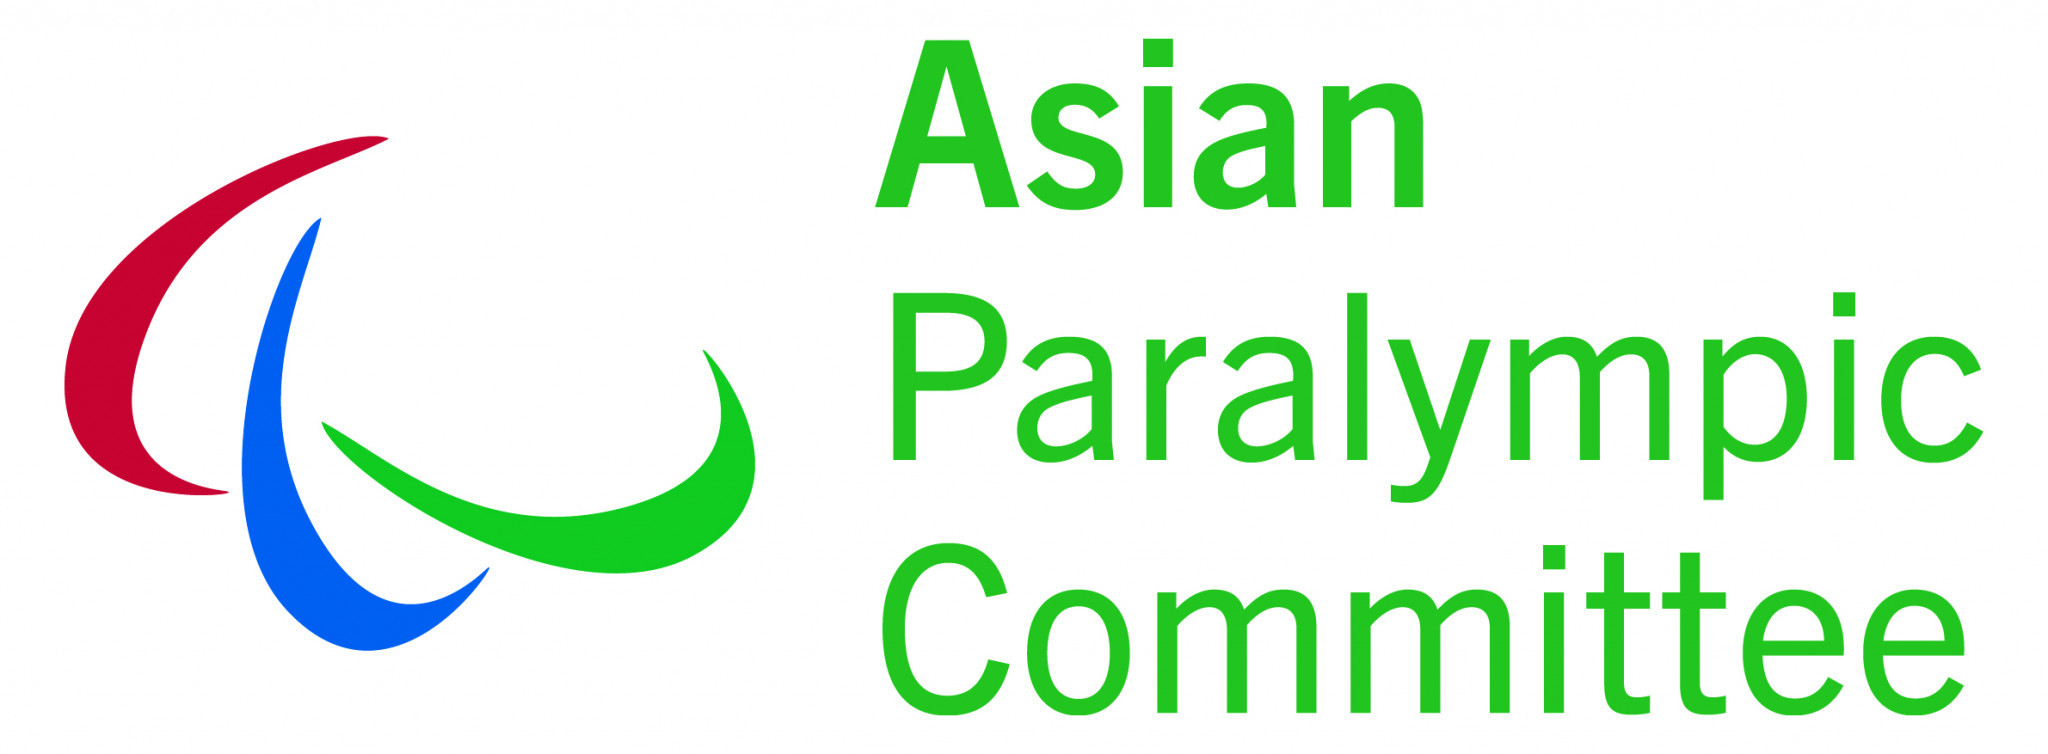 Nominations open for Asian Paralympic Committee standing committee members